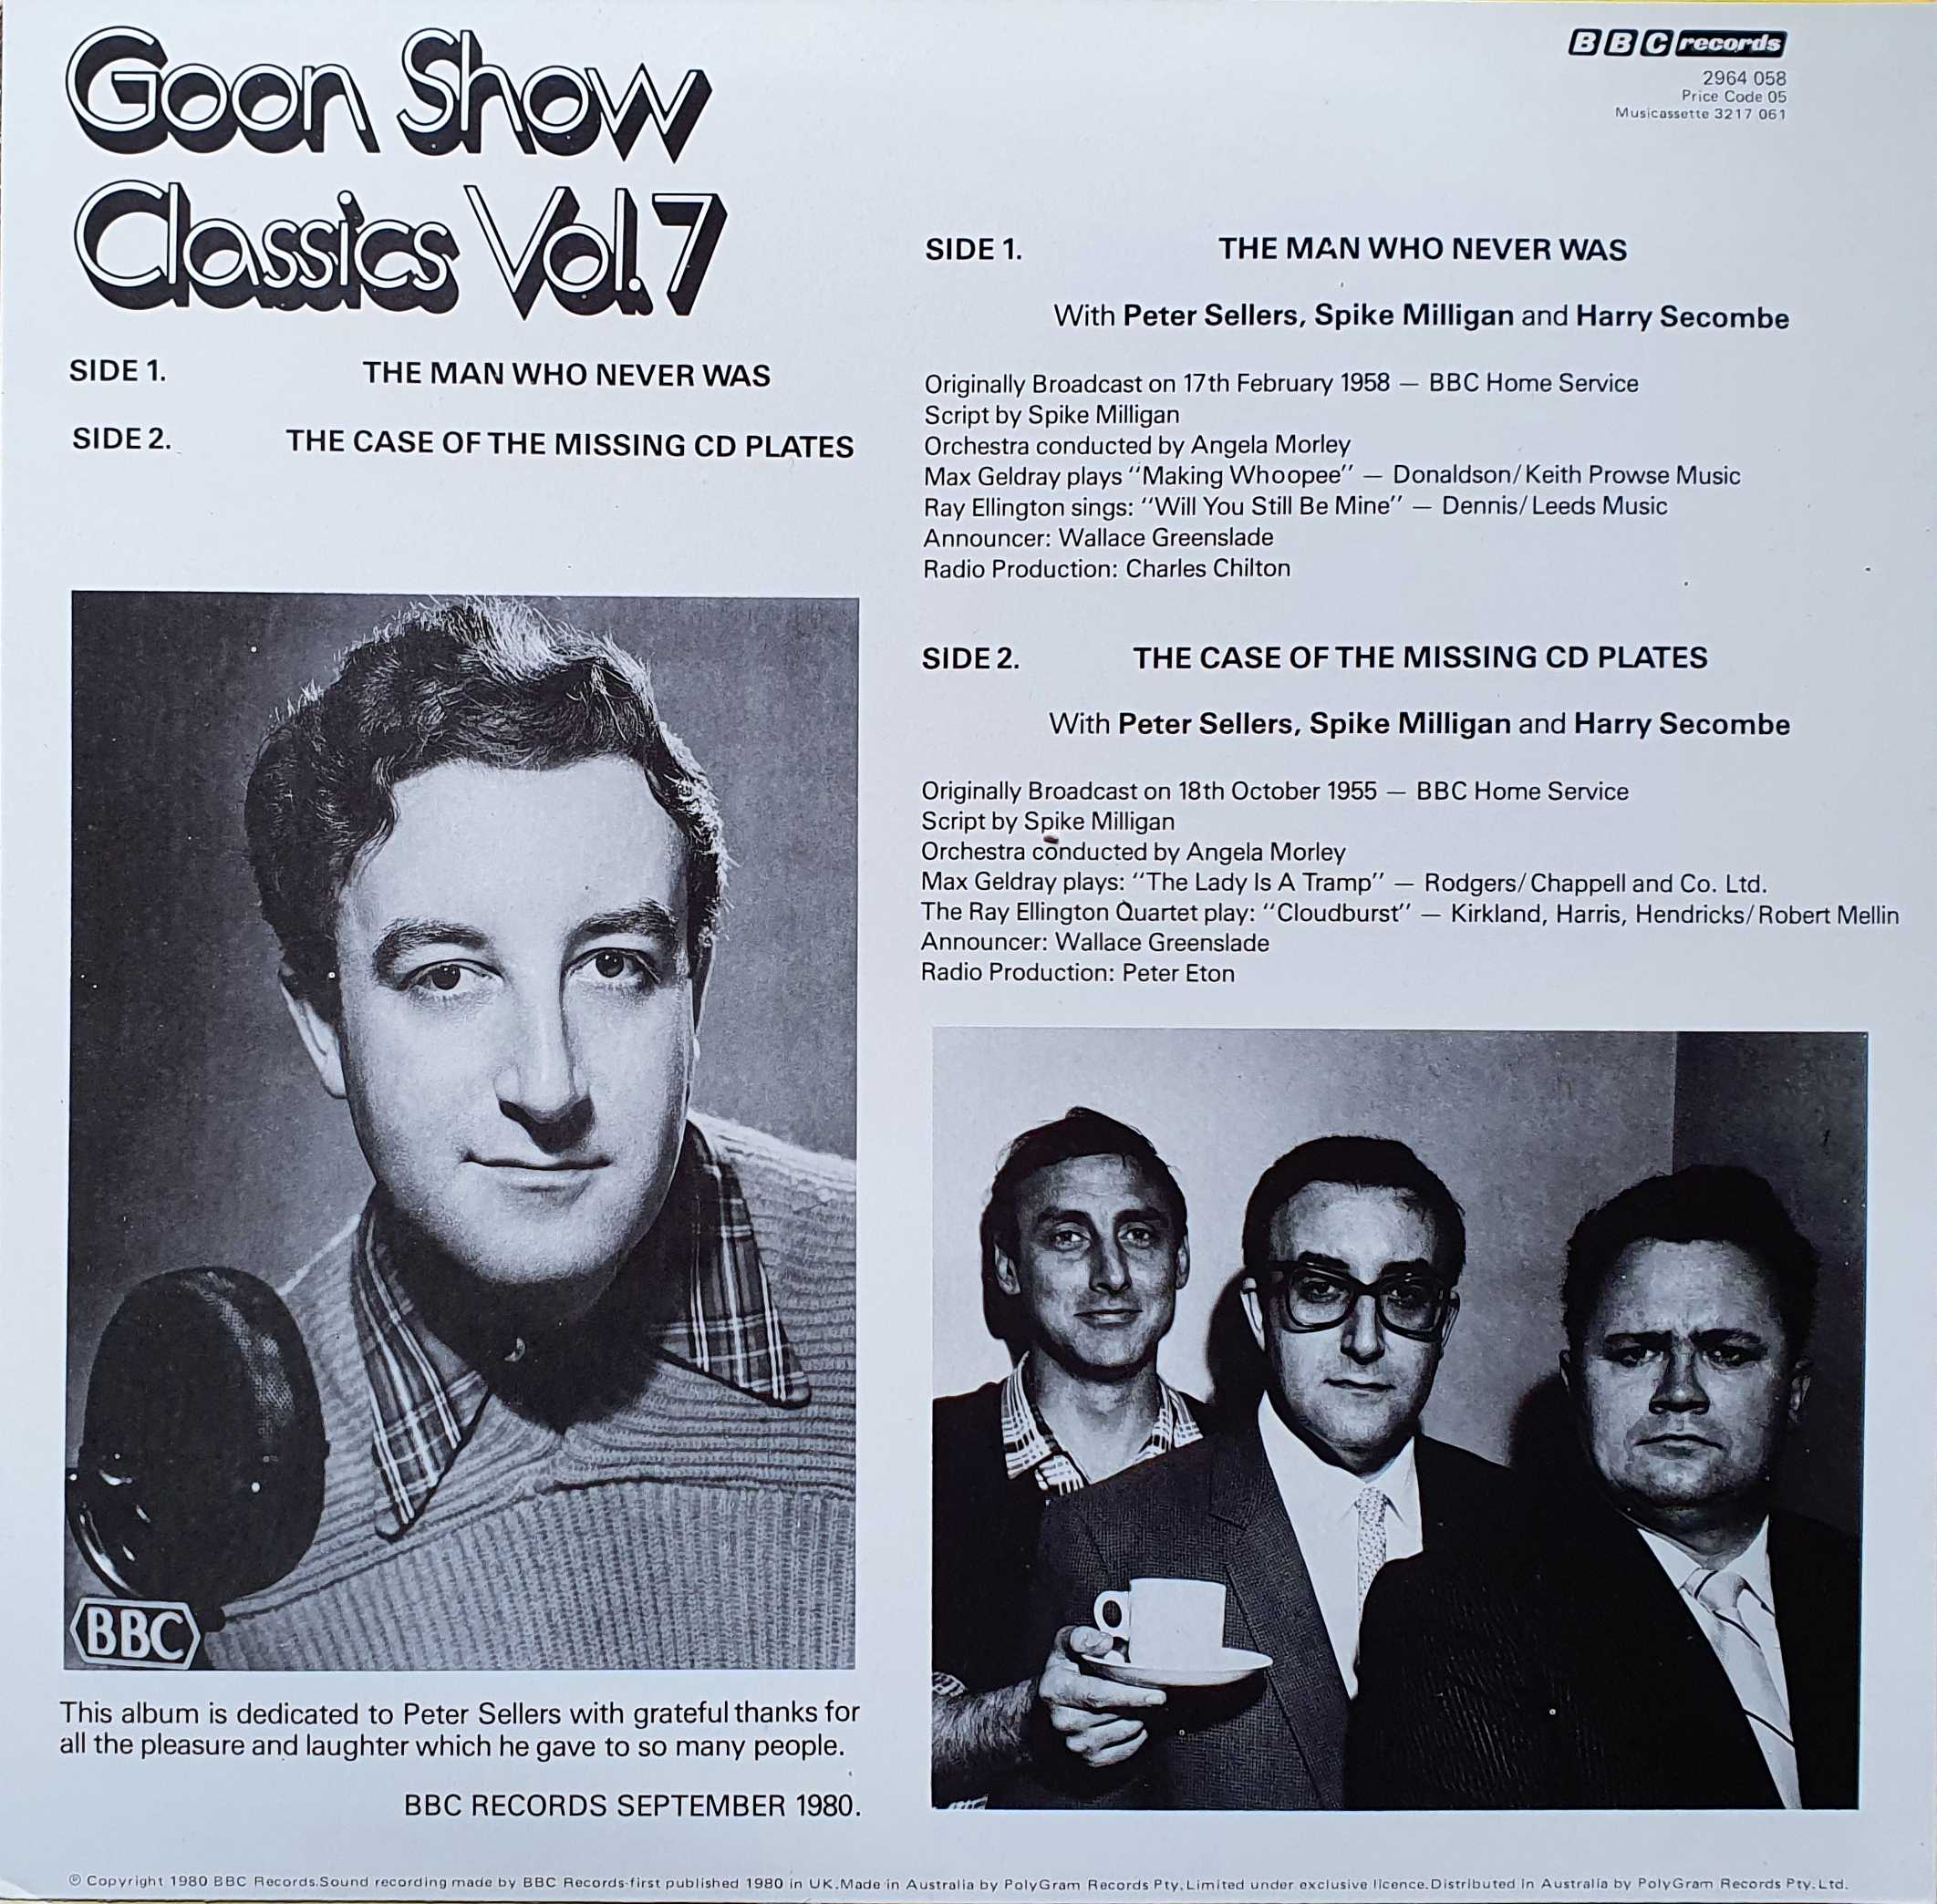 Picture of 2964 058 Goon Show classics vol. 7 by artist The Goon Show from the BBC records and Tapes library